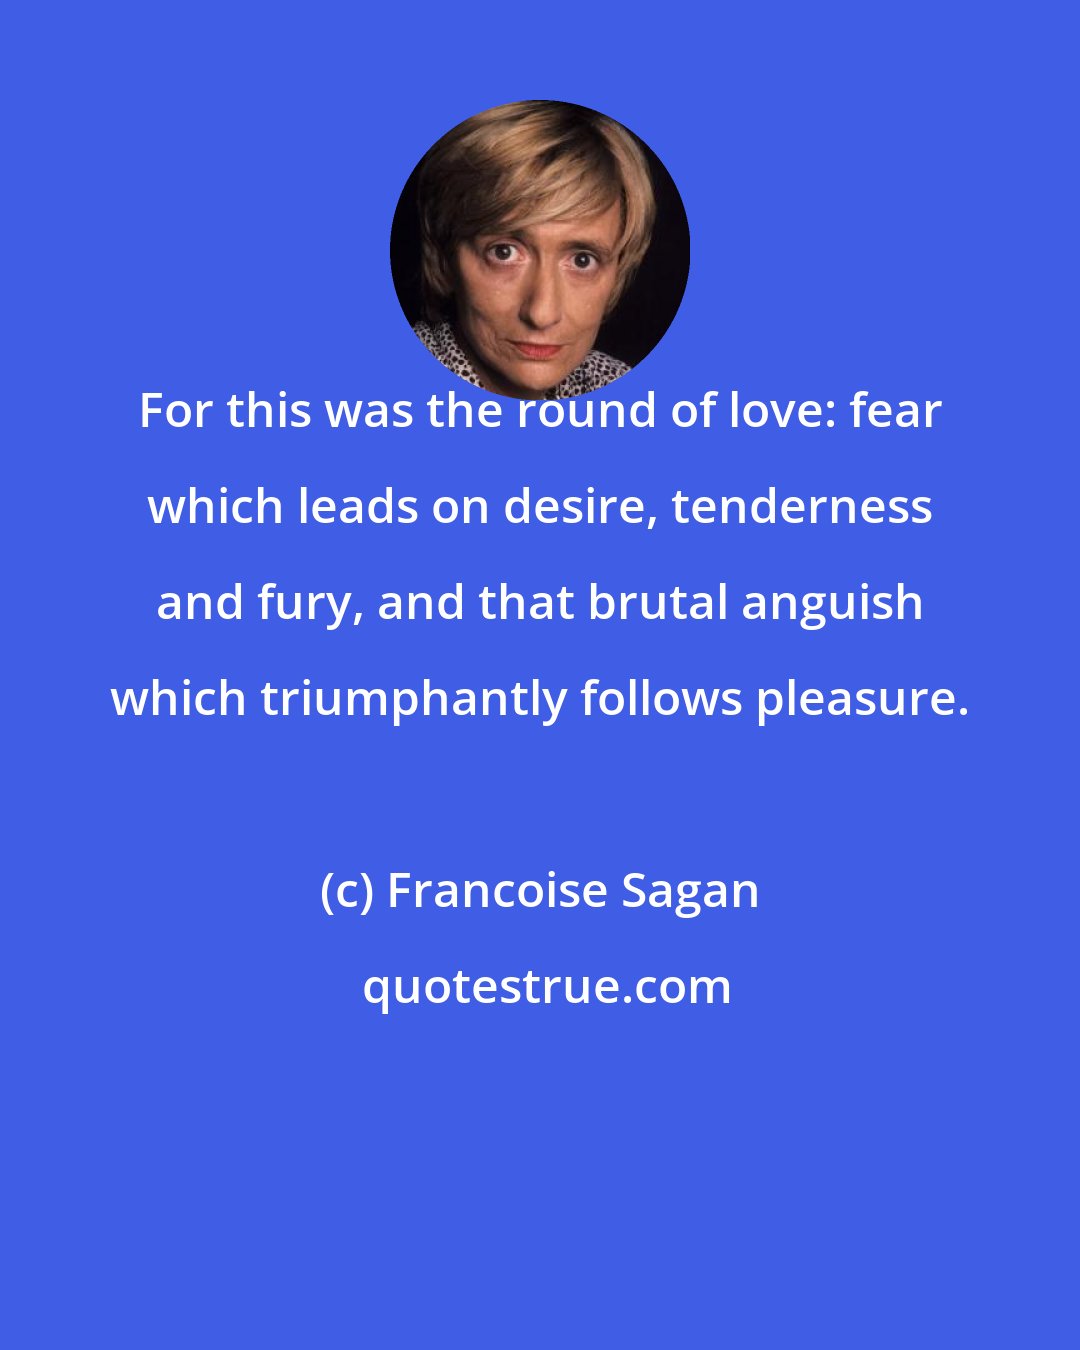 Francoise Sagan: For this was the round of love: fear which leads on desire, tenderness and fury, and that brutal anguish which triumphantly follows pleasure.